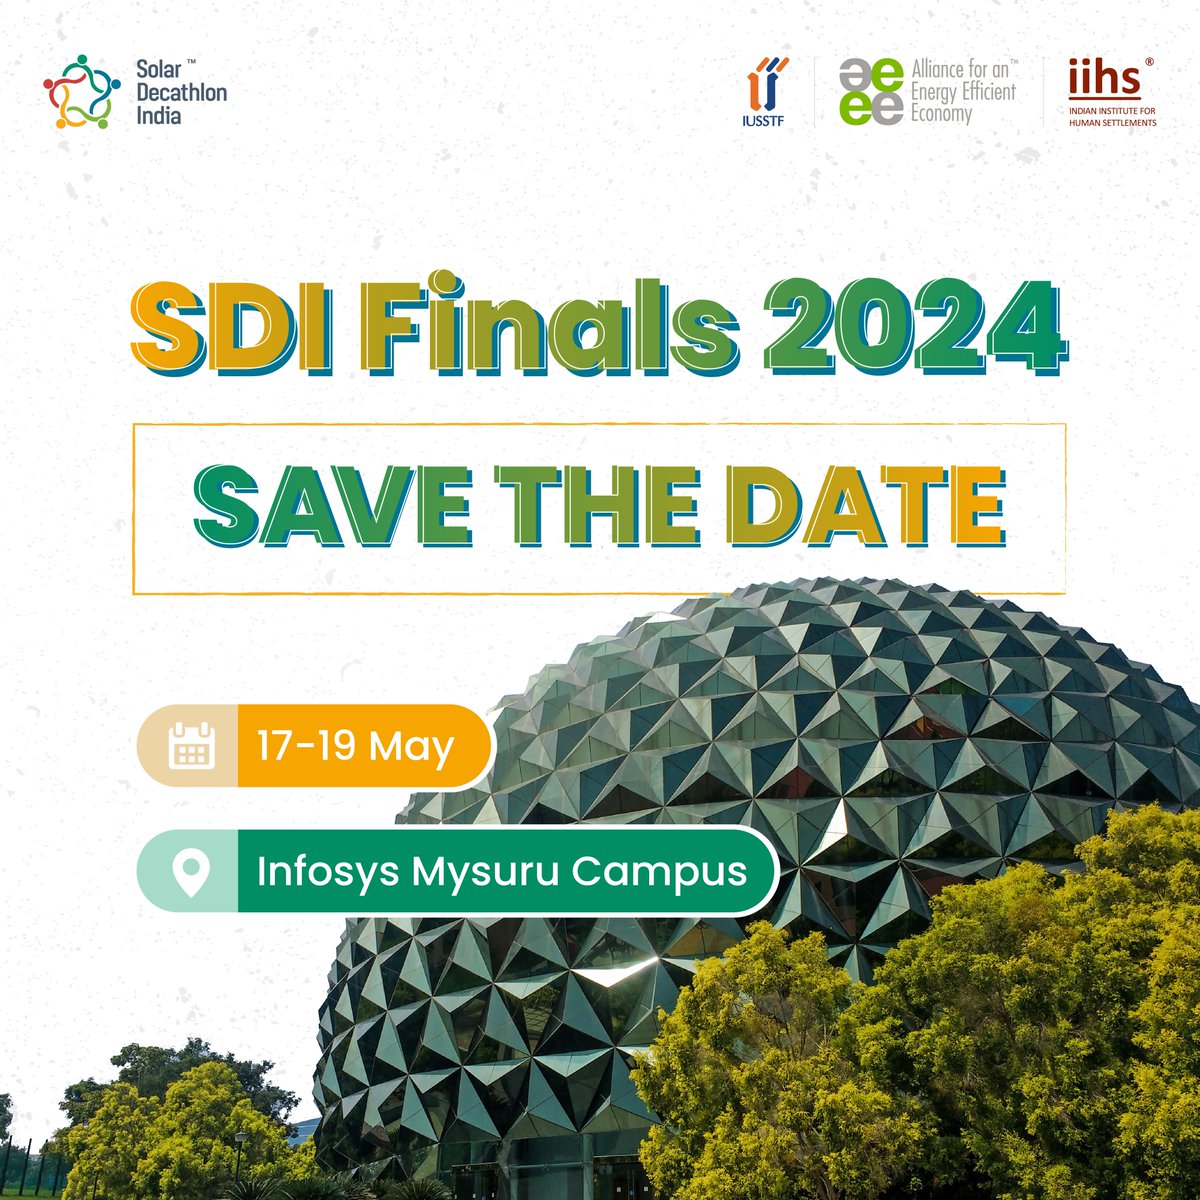 The #SDIfinals2024 is just around the corner! We'll get together in person at @infosys Mysuru for final presentations, winner announcements, the CSI Exhibition & Award, Career Fair, and more. If you’re not joining us in person, you can tune into YouTube to catch the livestream.